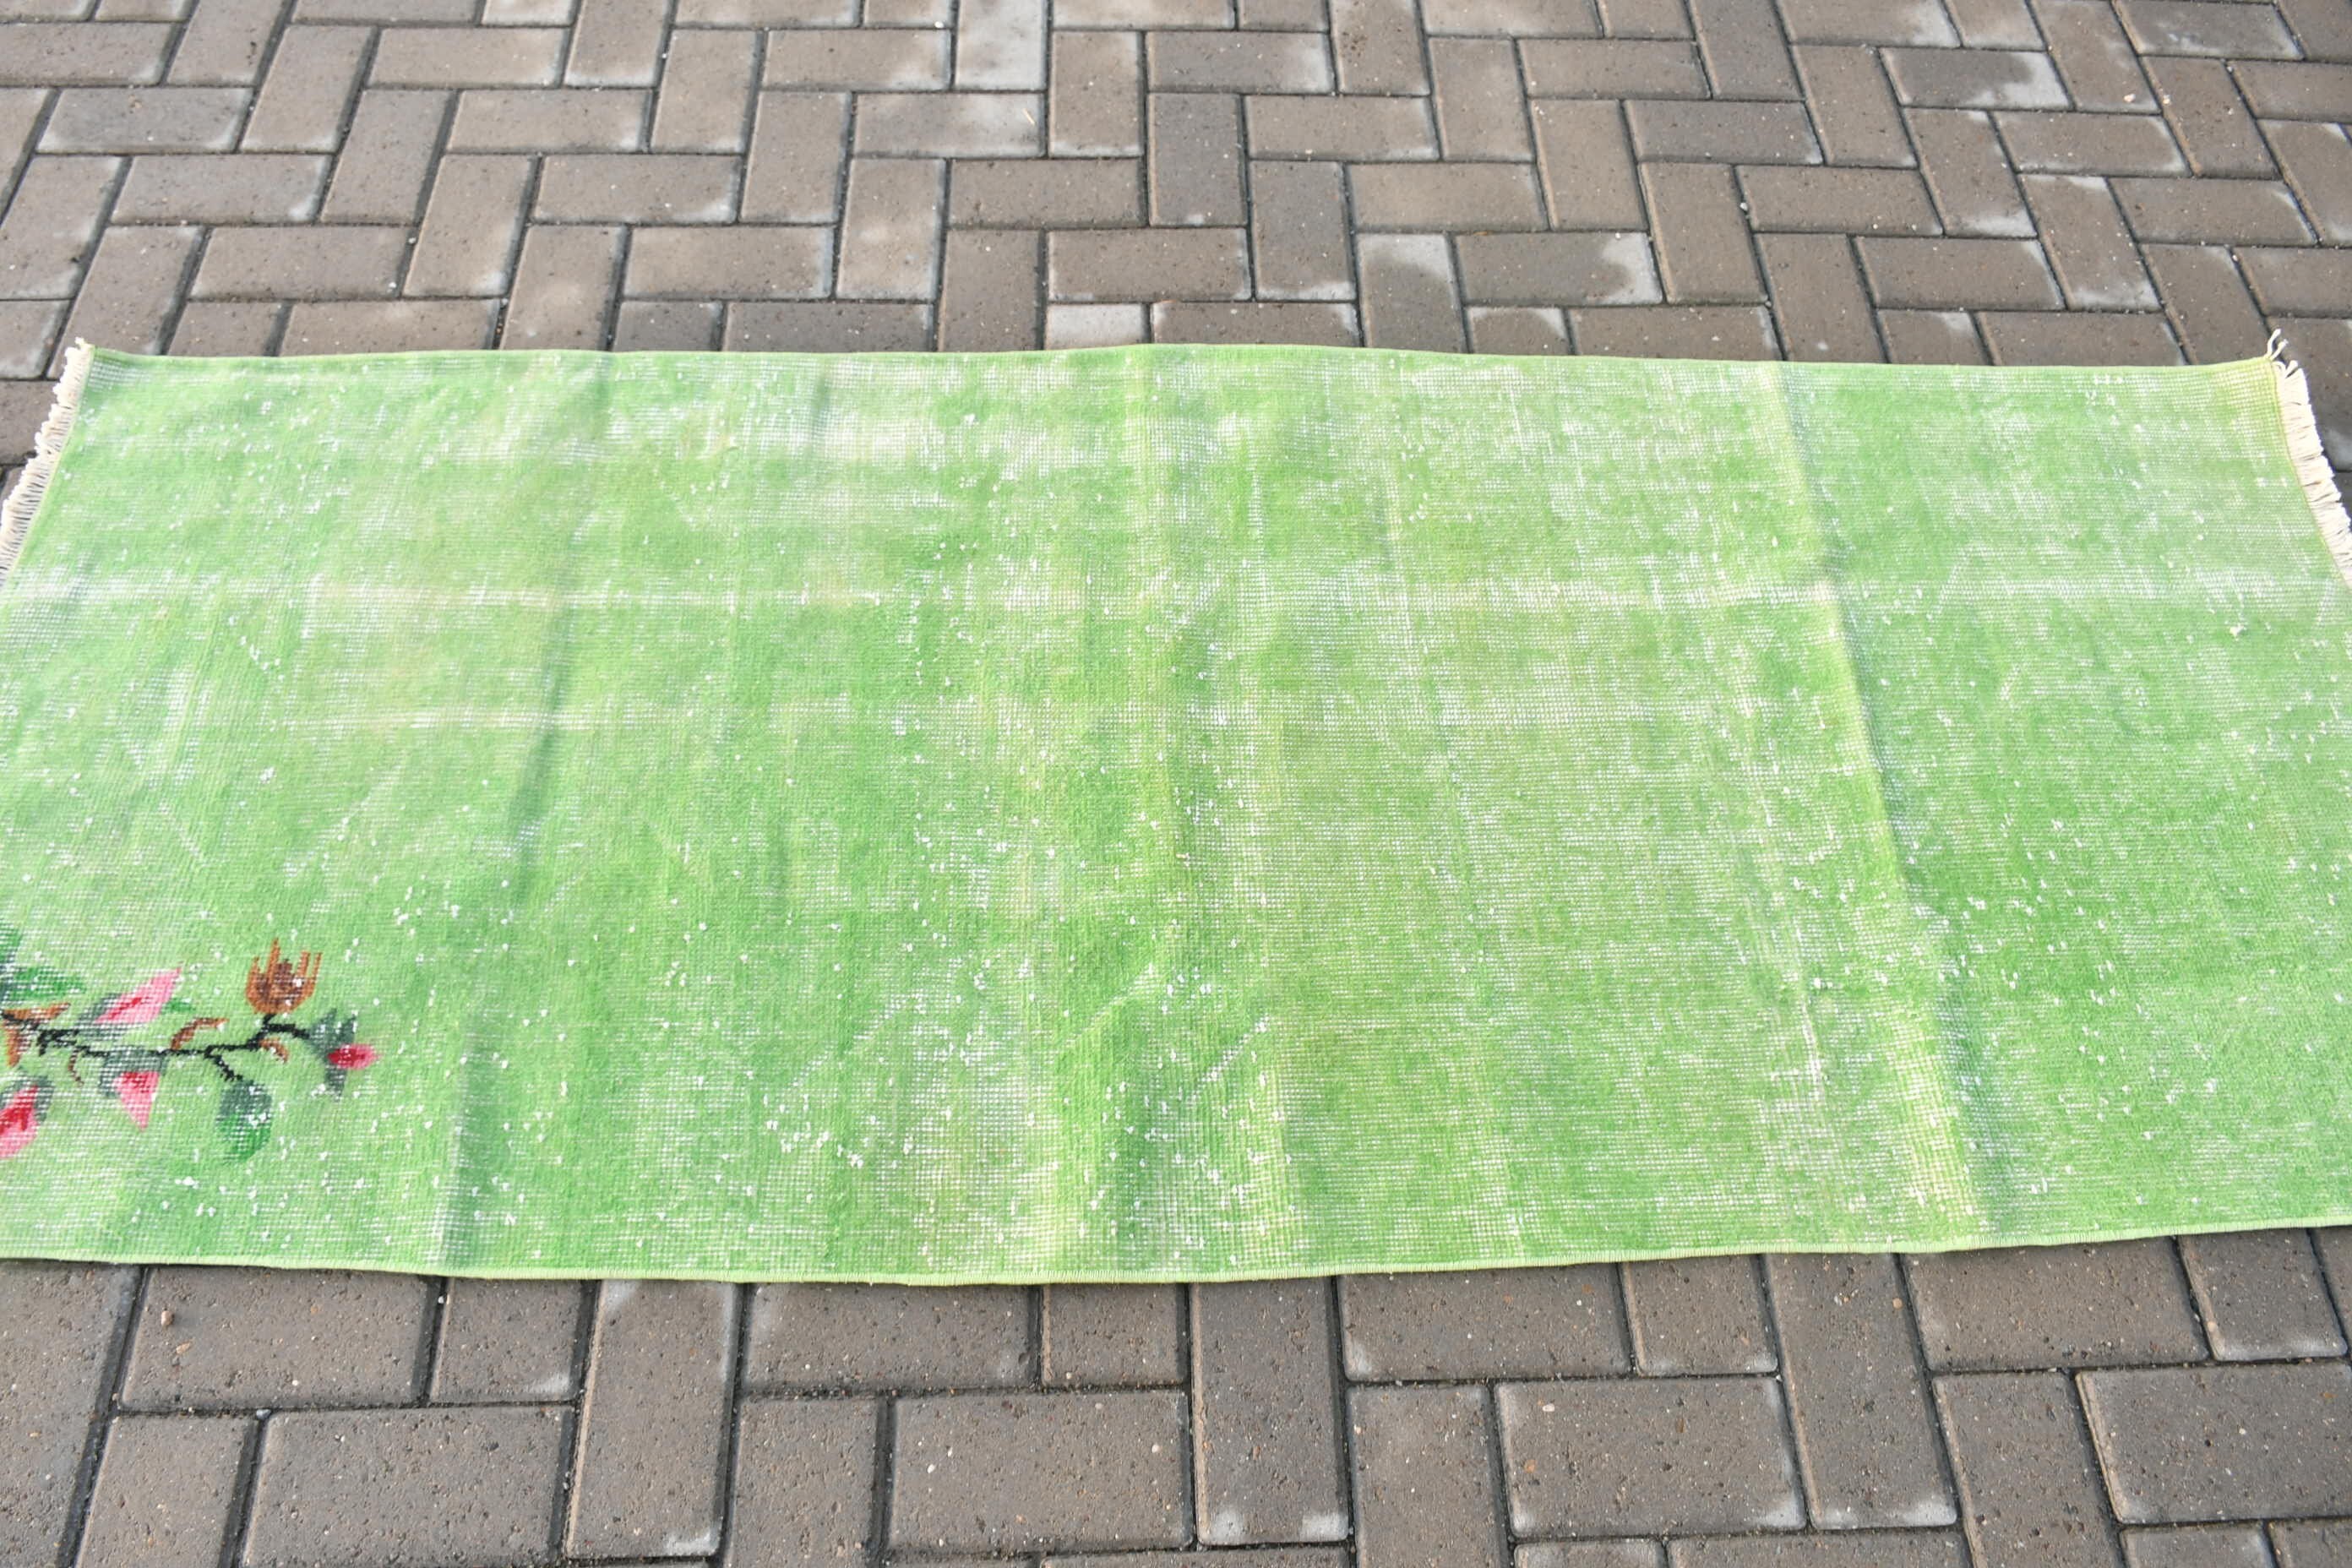 Wool Rug, Vintage Rug, Kitchen Rug, Rugs for Bedroom, Green Cool Rugs, Vintage Decor Rug, 2.8x6.7 ft Accent Rugs, Entry Rug, Turkish Rugs